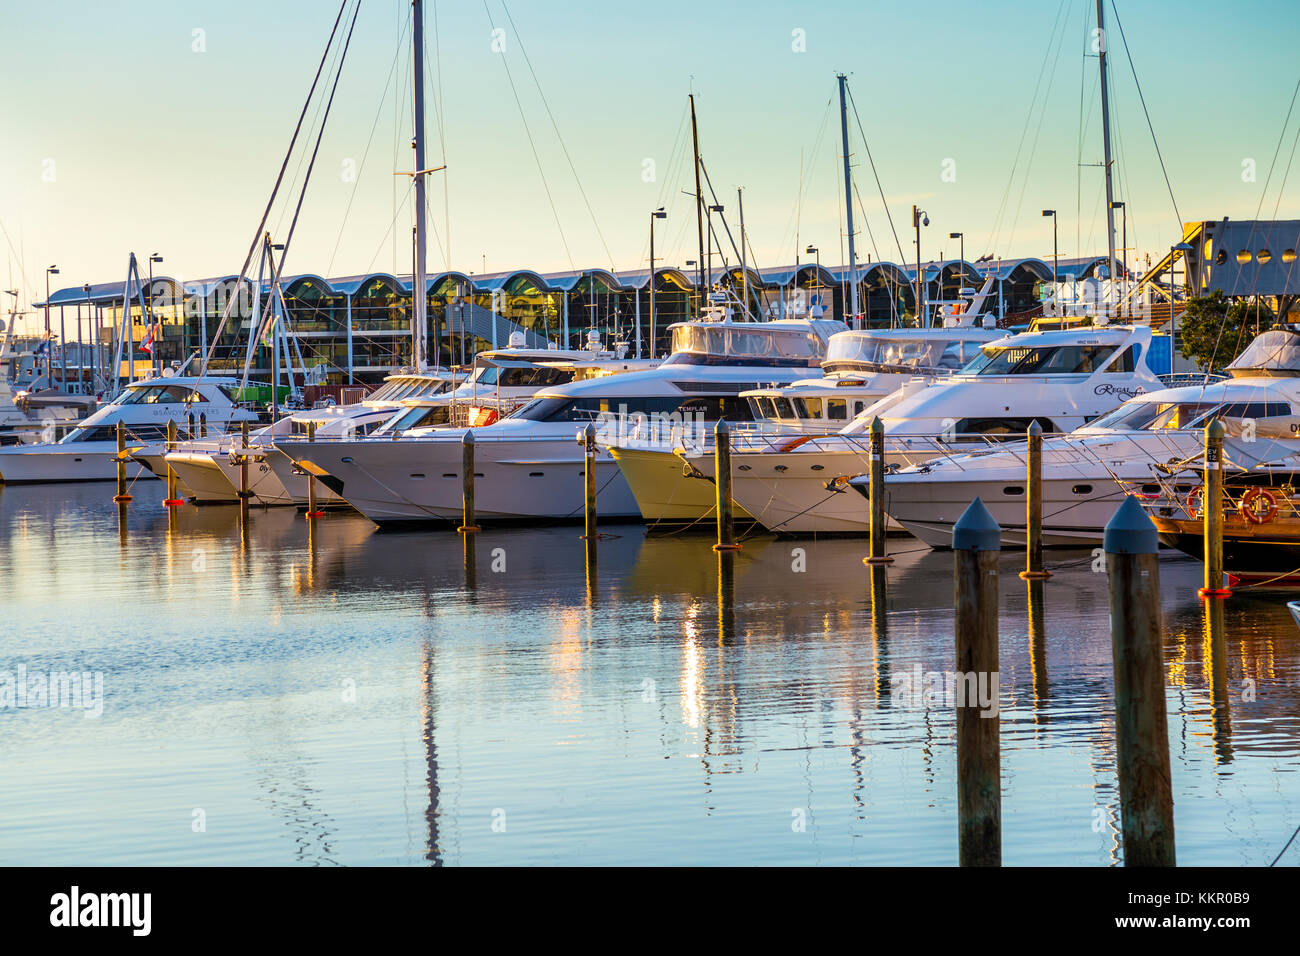 Boats in a harbour marina at sundown, Auckland, New Zealand Stock Photo